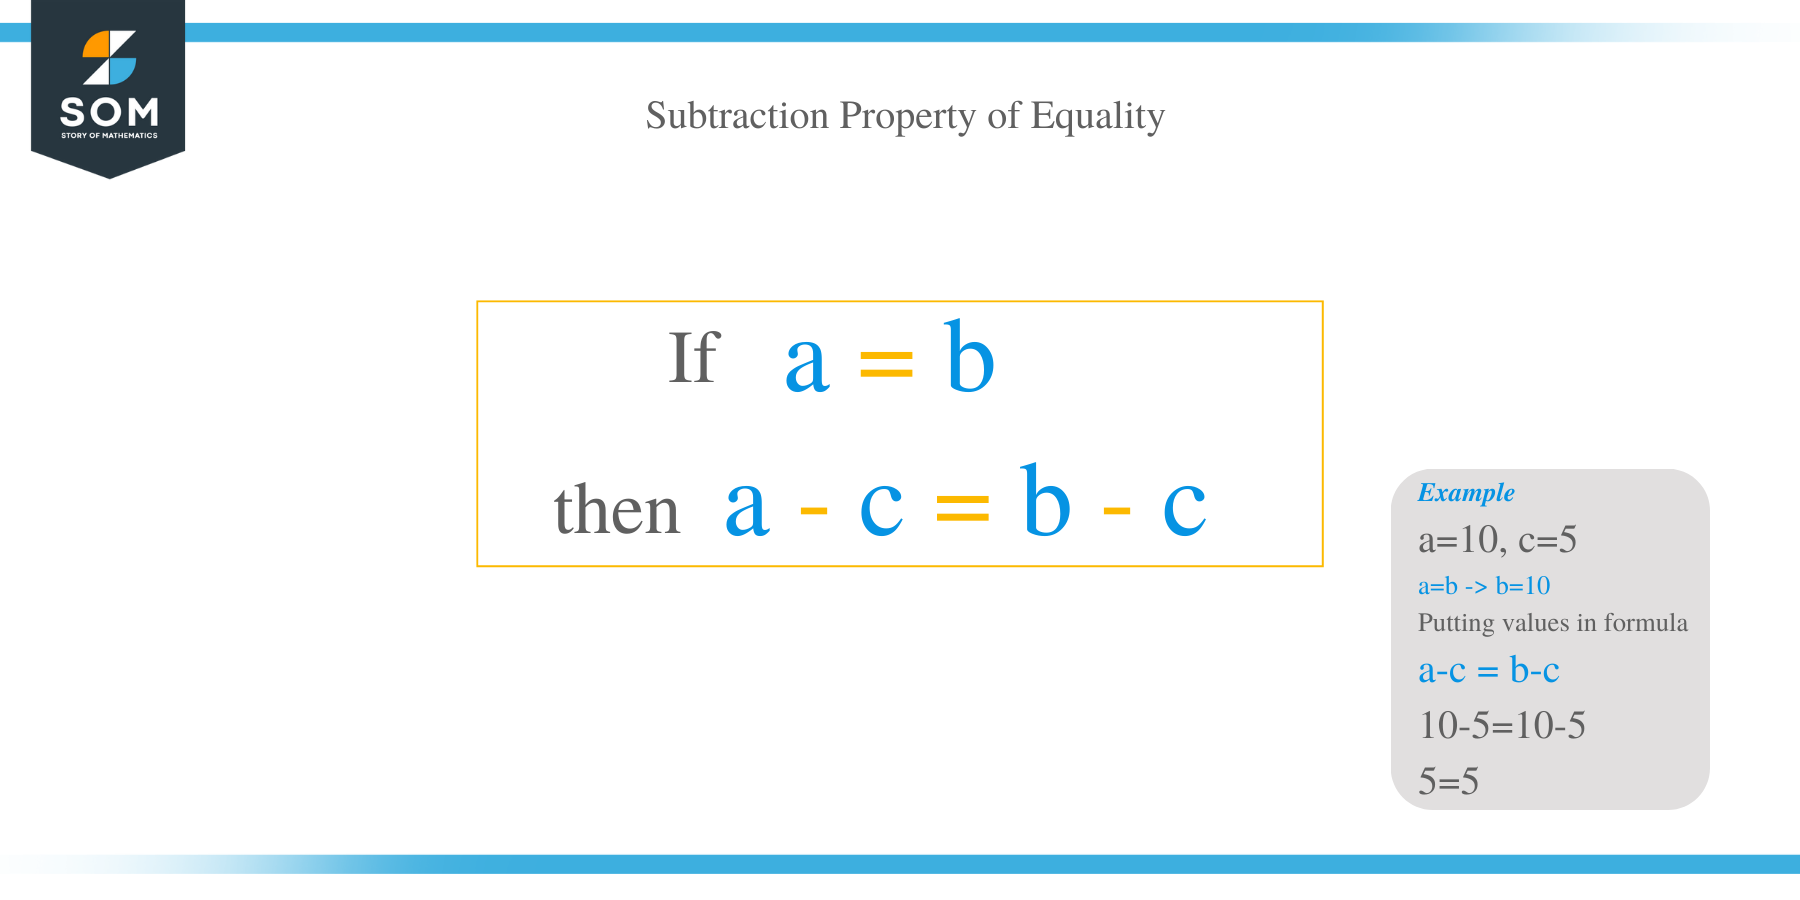 What Is the Subtraction Property of Equality?